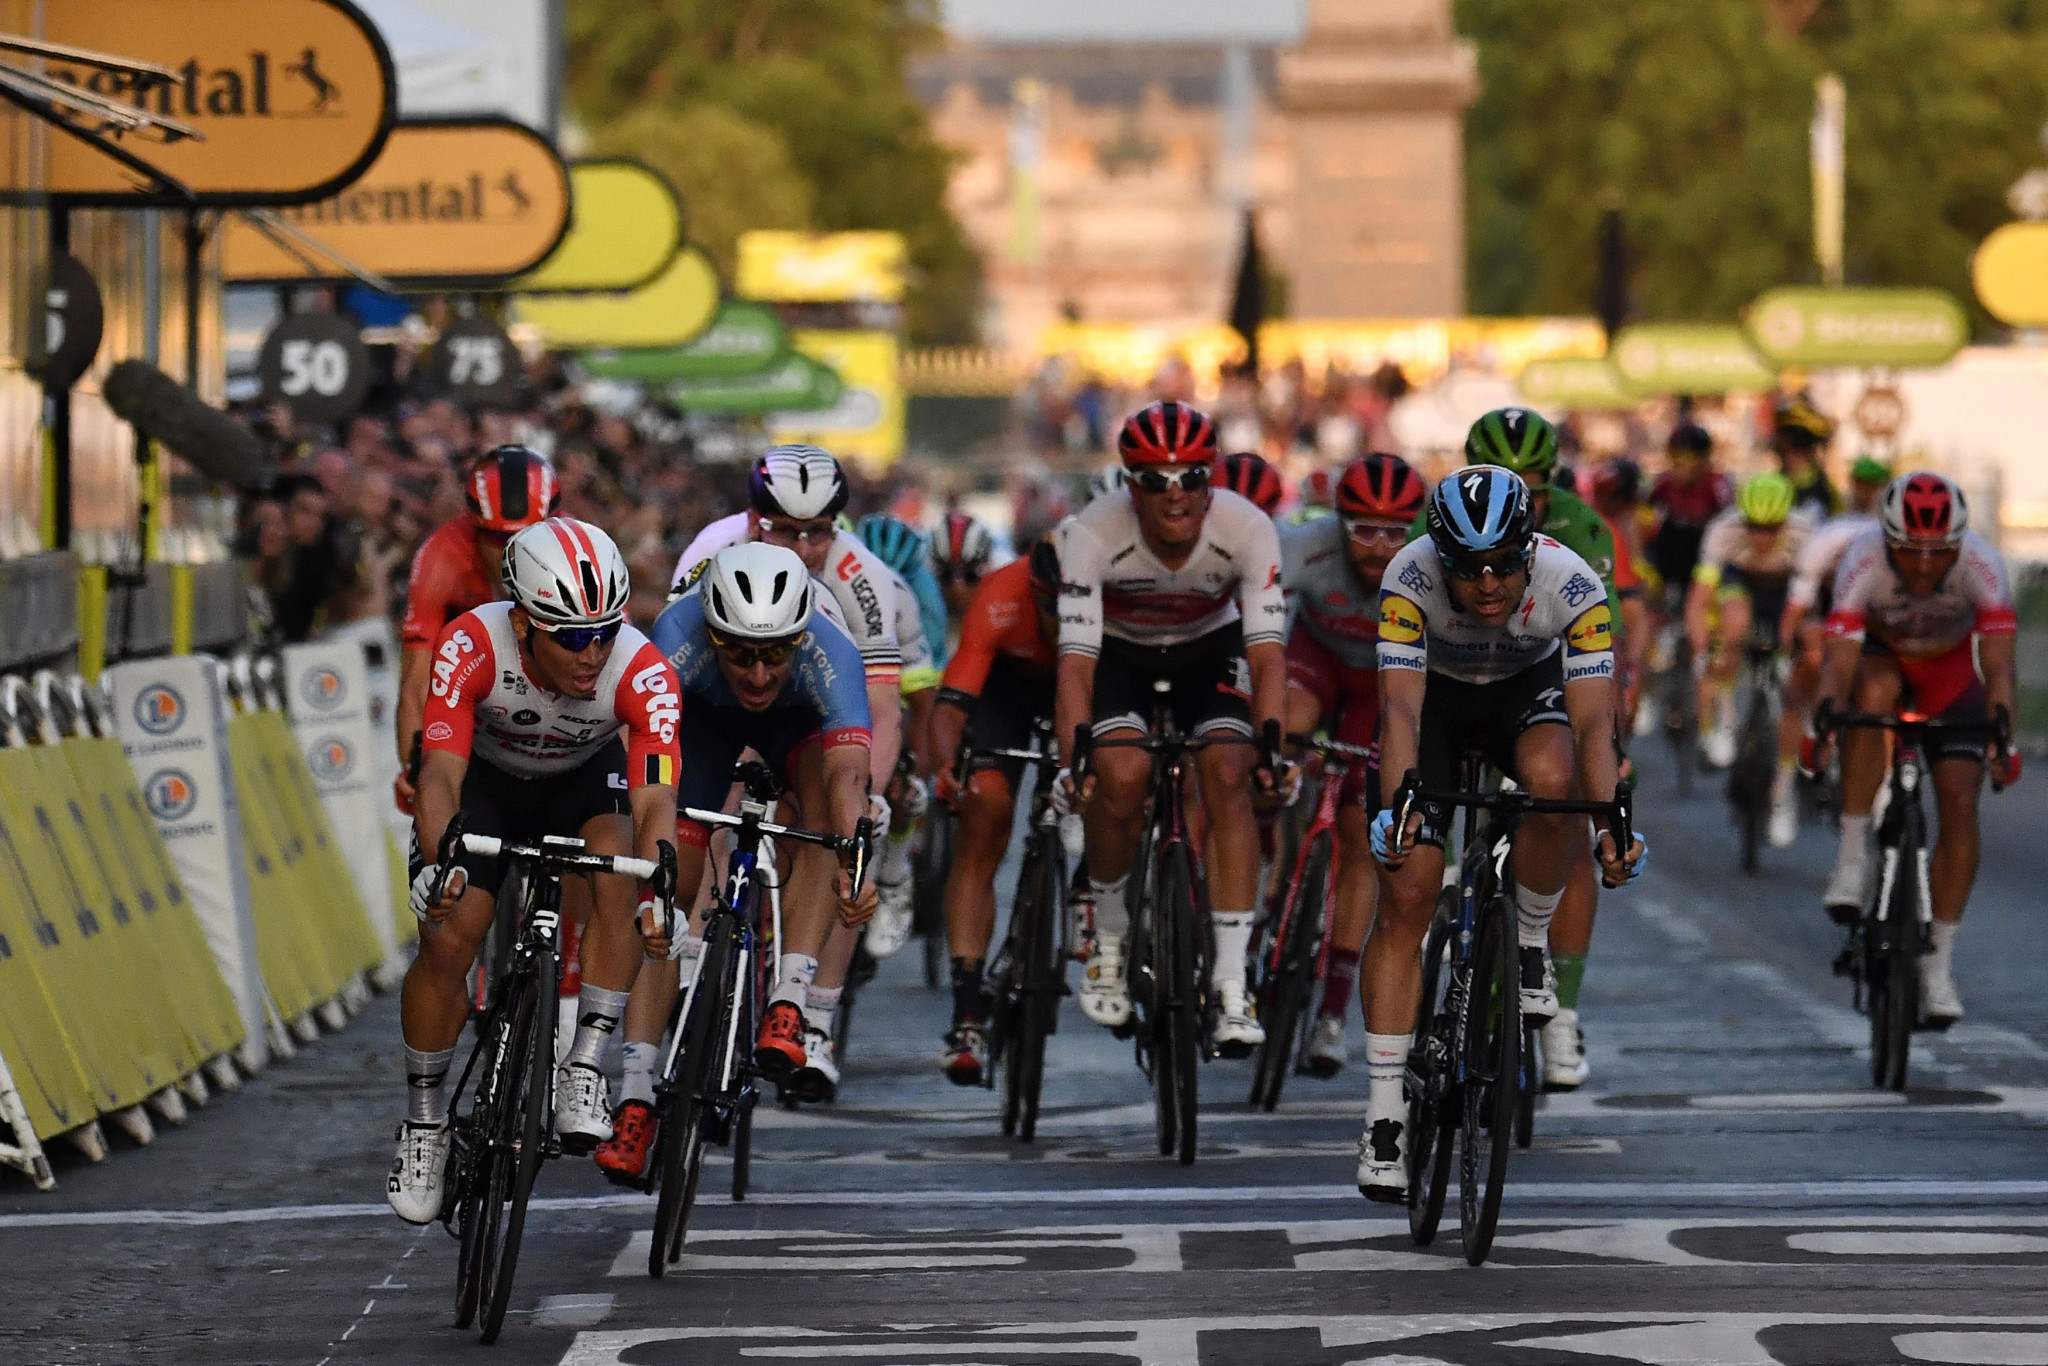 Tour de France organisers reportedly considering postponement rather than cancellation